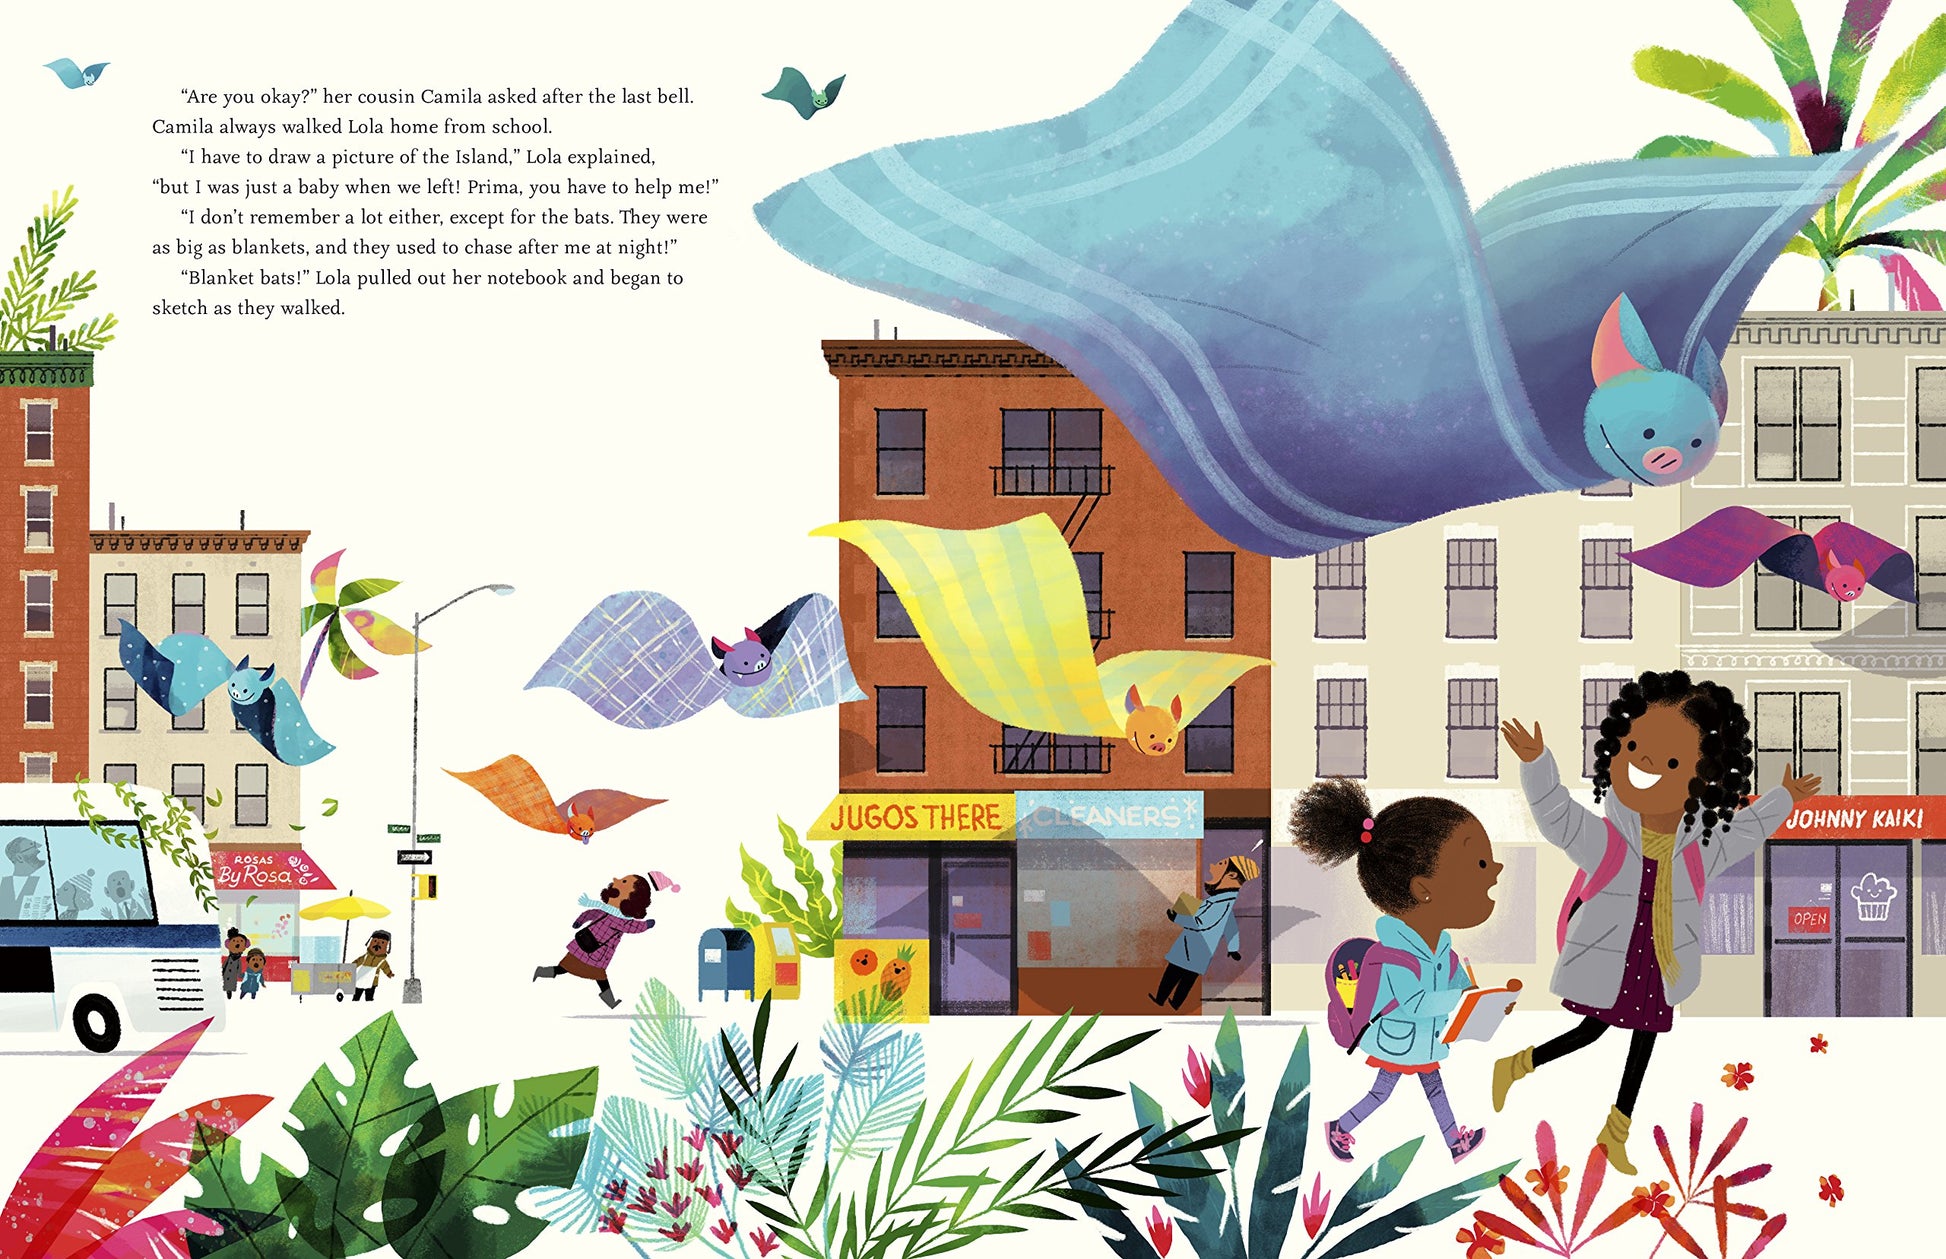 a page with illustration of a young girl walking in the city with her cousin with flying blanket bats and text